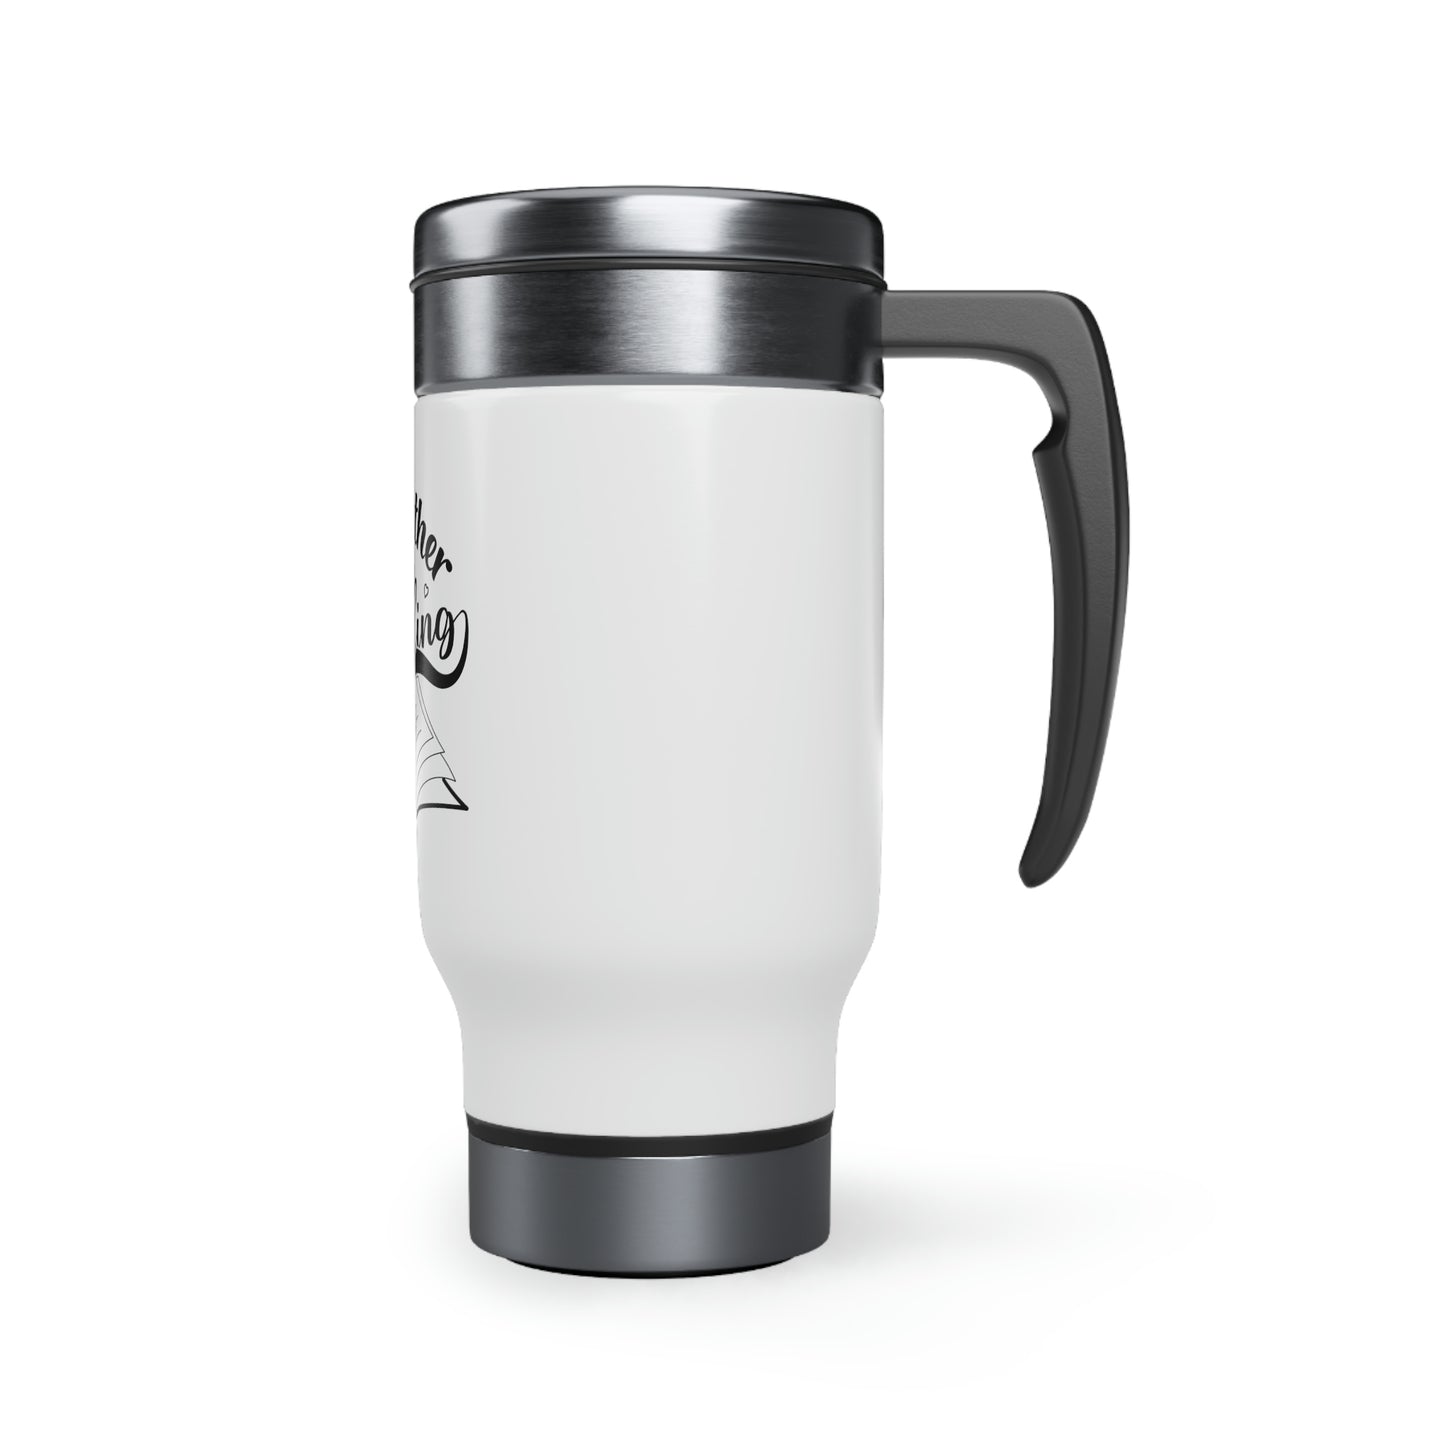 "I'd Rather Be  Reading" Stainless Steel Travel Mug with Handle, 14oz